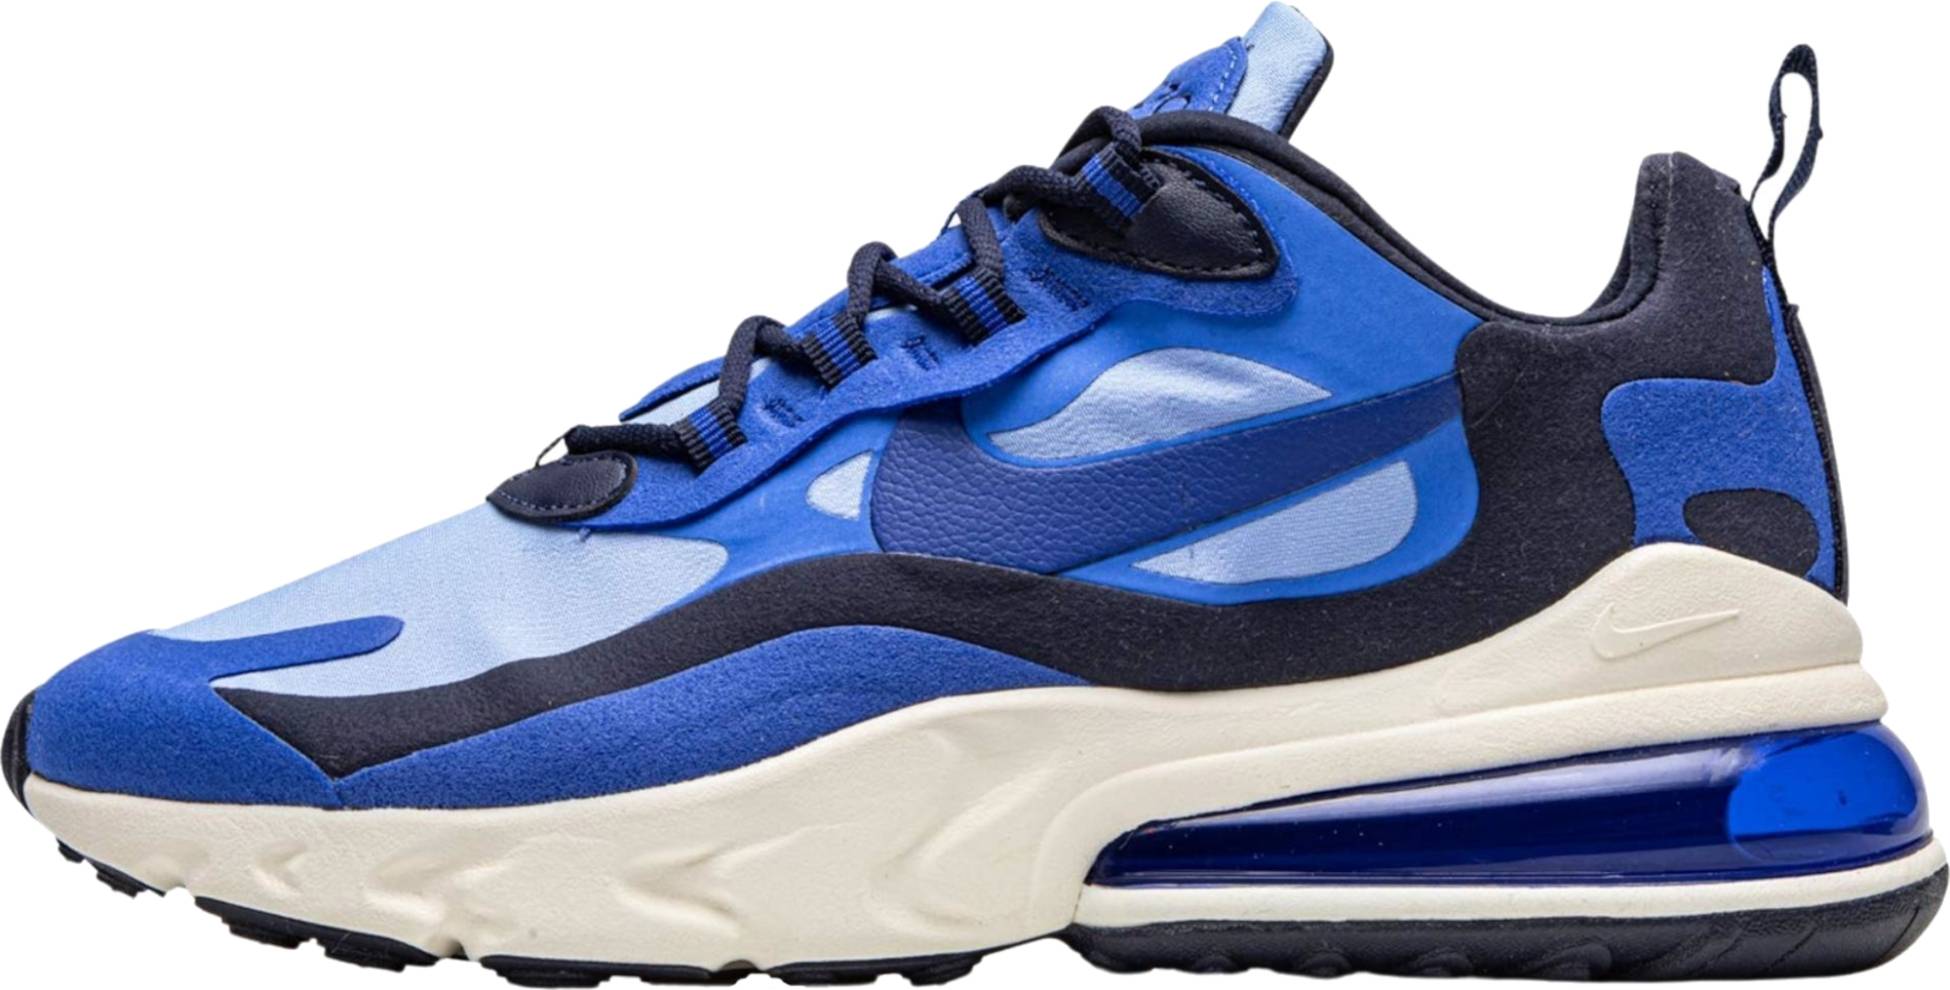 200+ Blue Nike sneakers: Save up to 25 